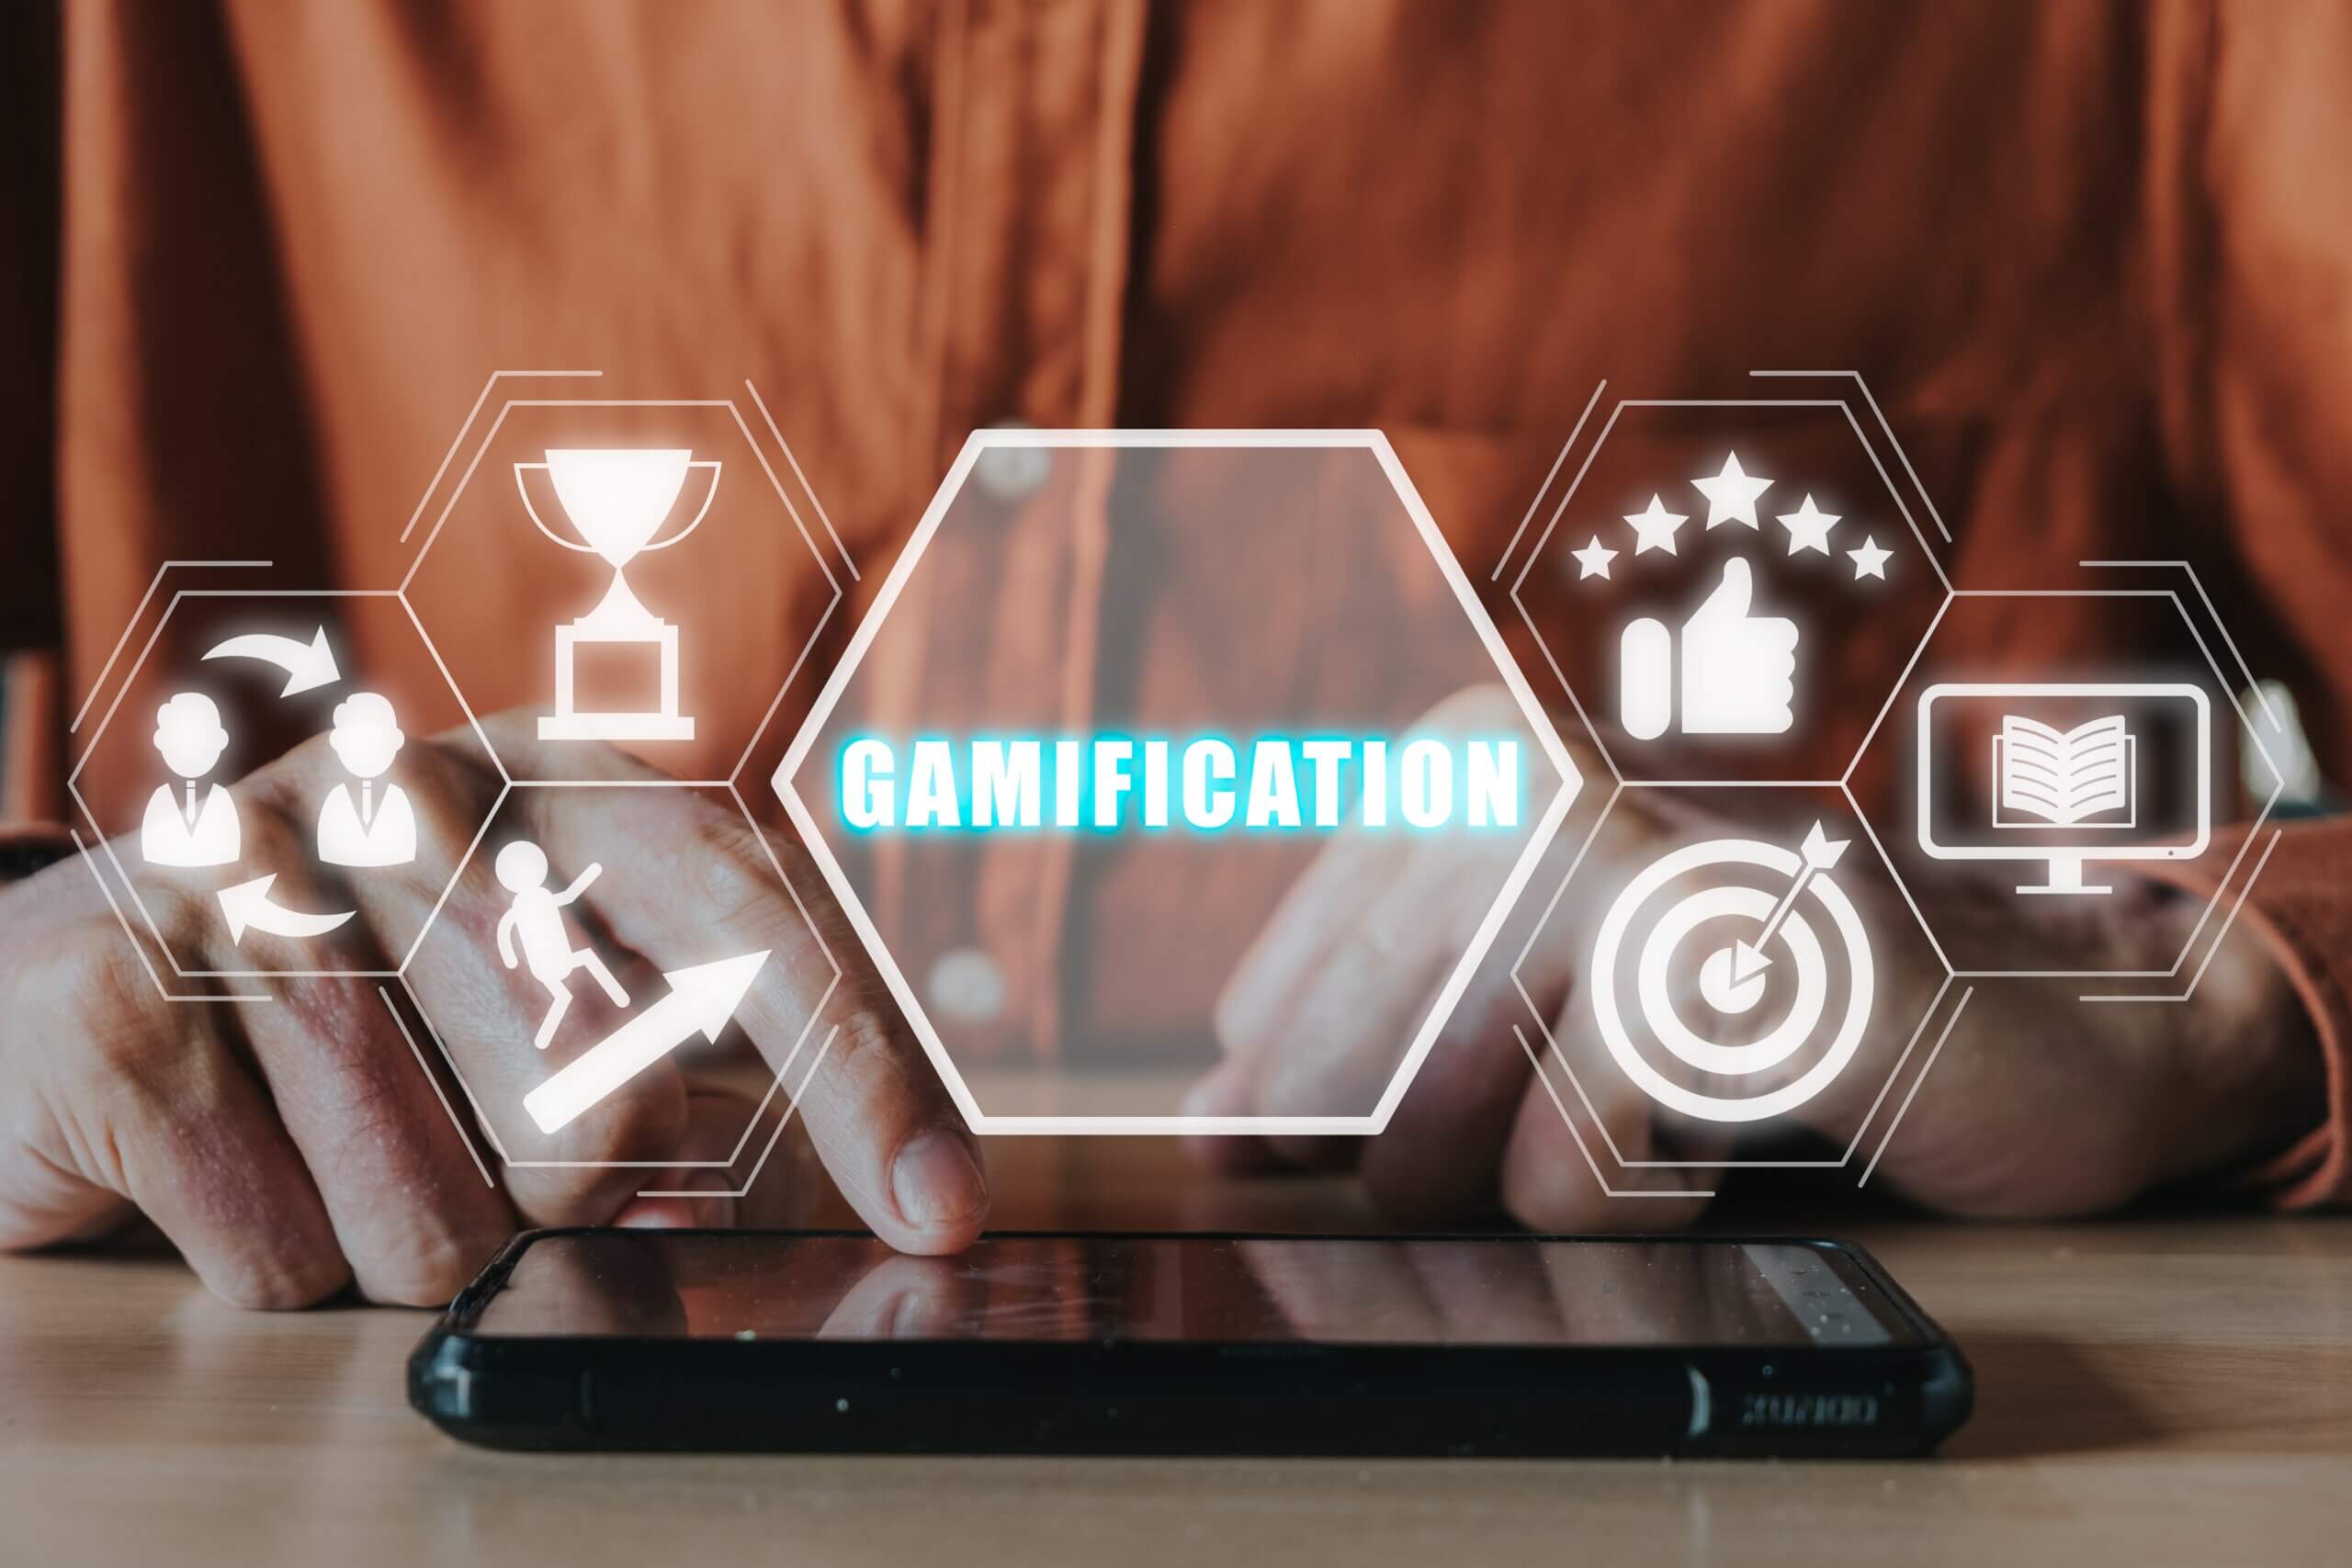 Person working on gamification in IT recruitment on their phone